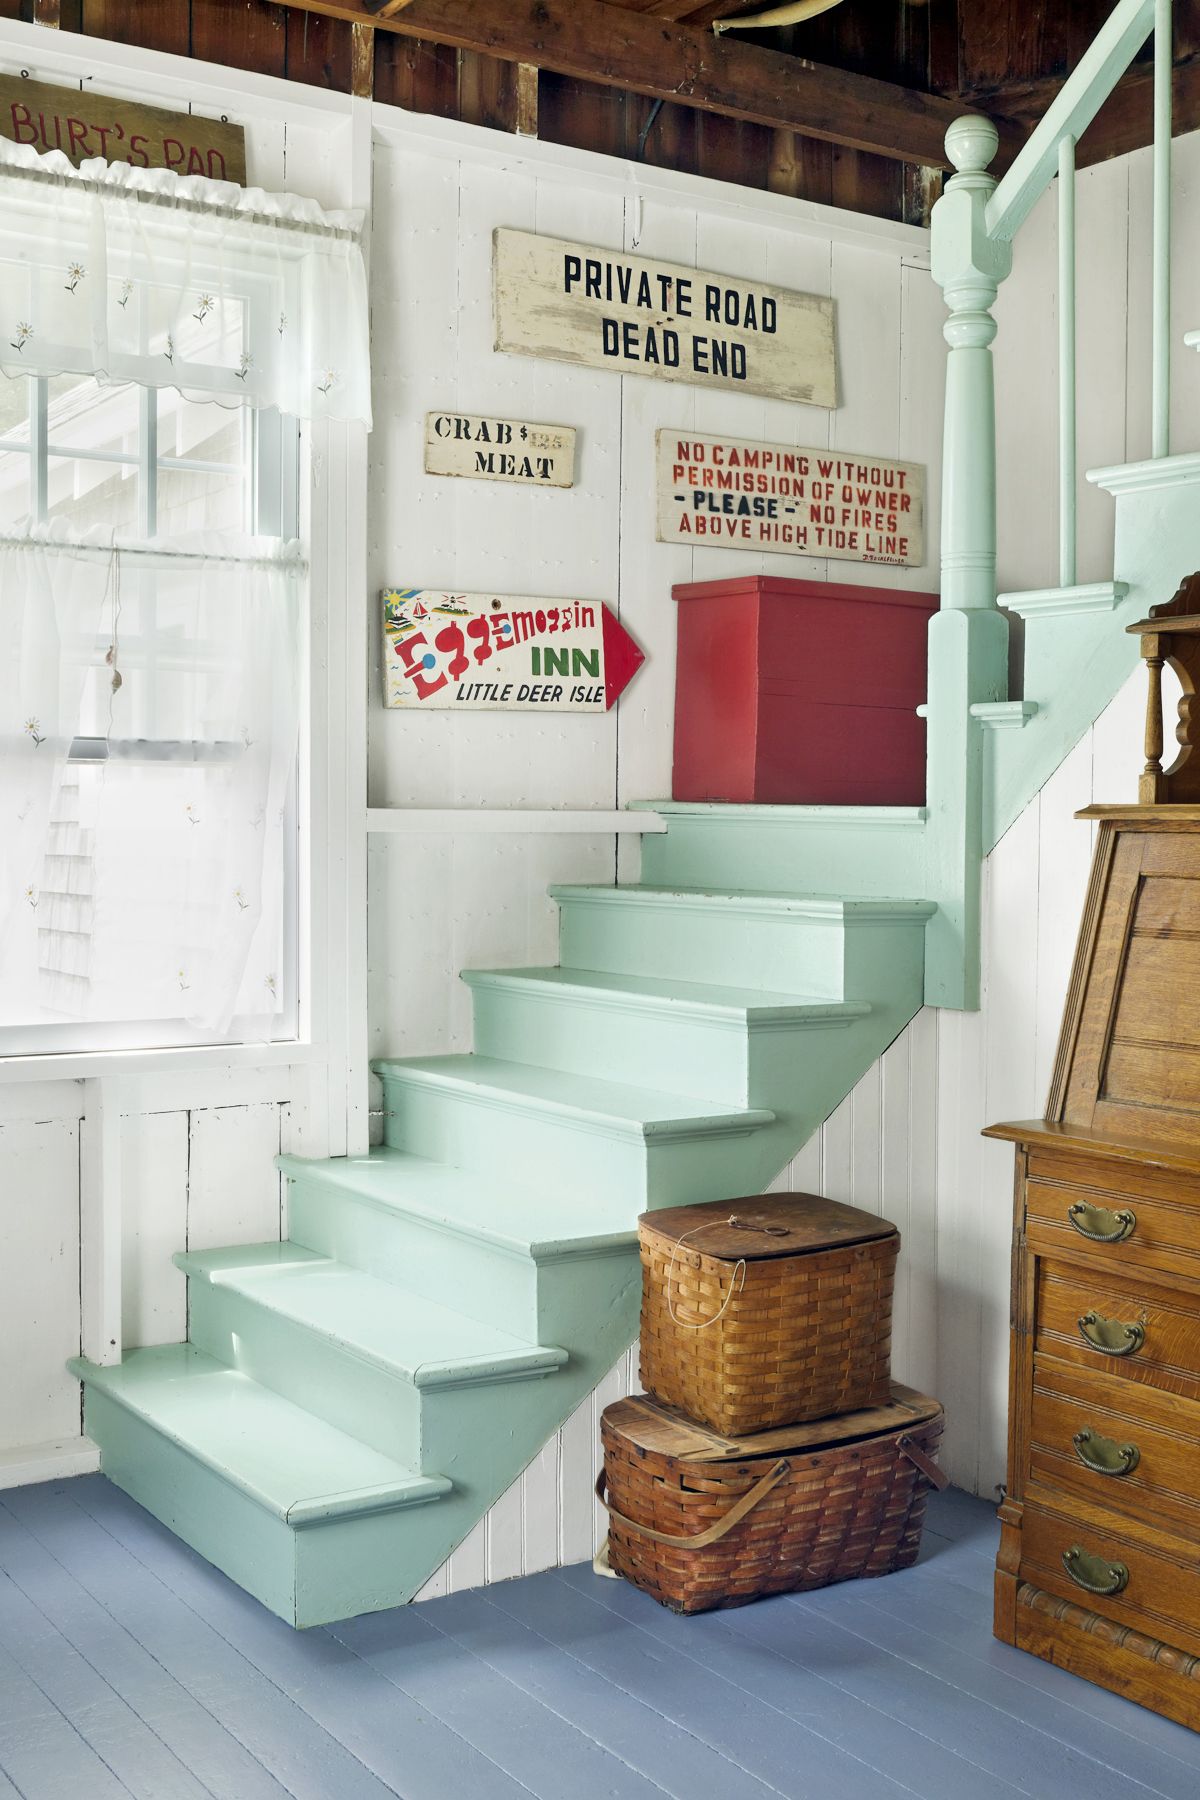 Staircase designs: Materials and decoration ideas